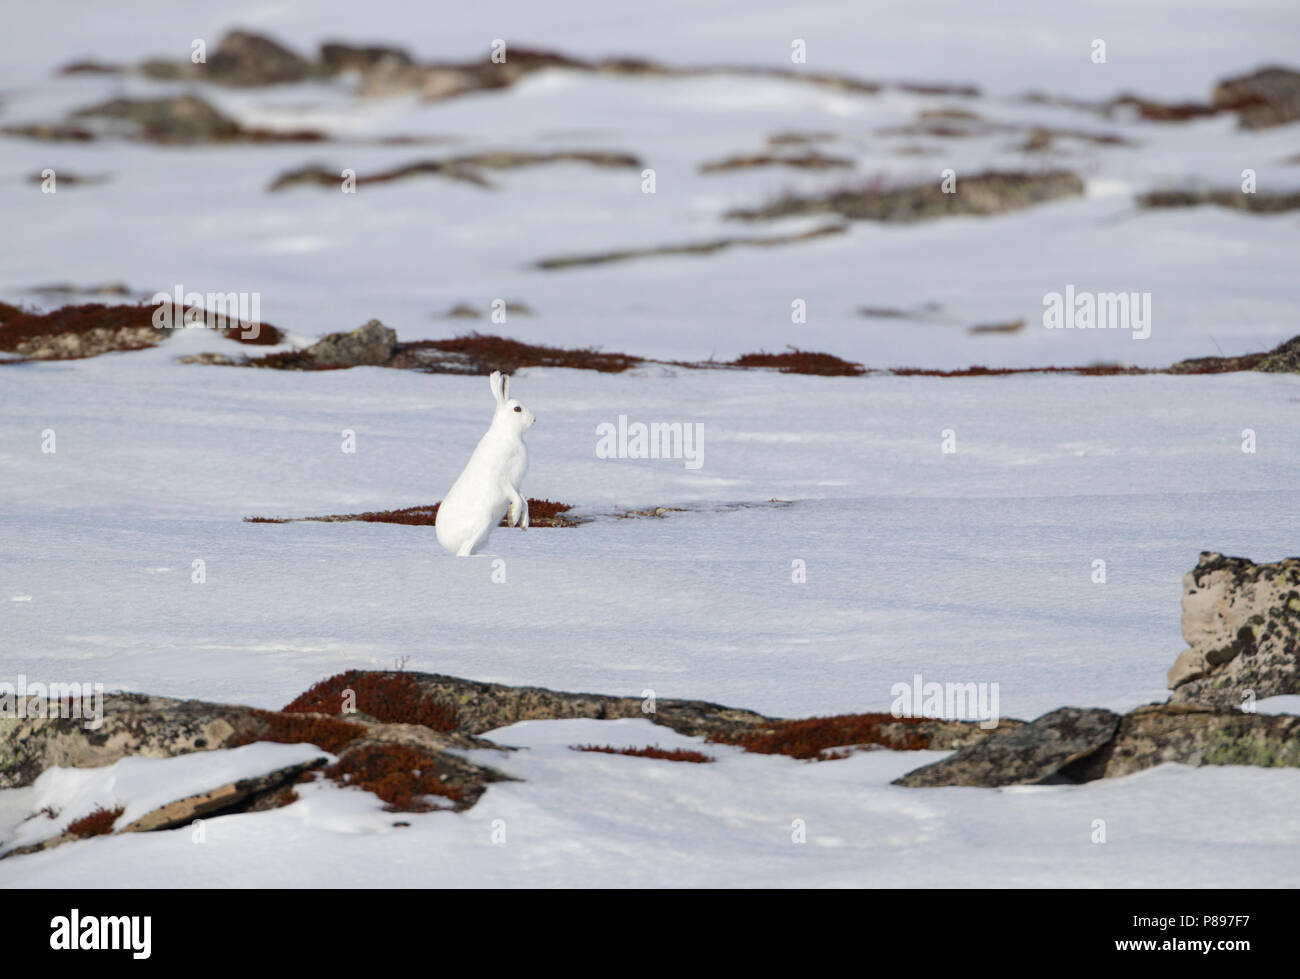 A winter plumaged (pure white) Mountain Hare in the snow. Stock Photo